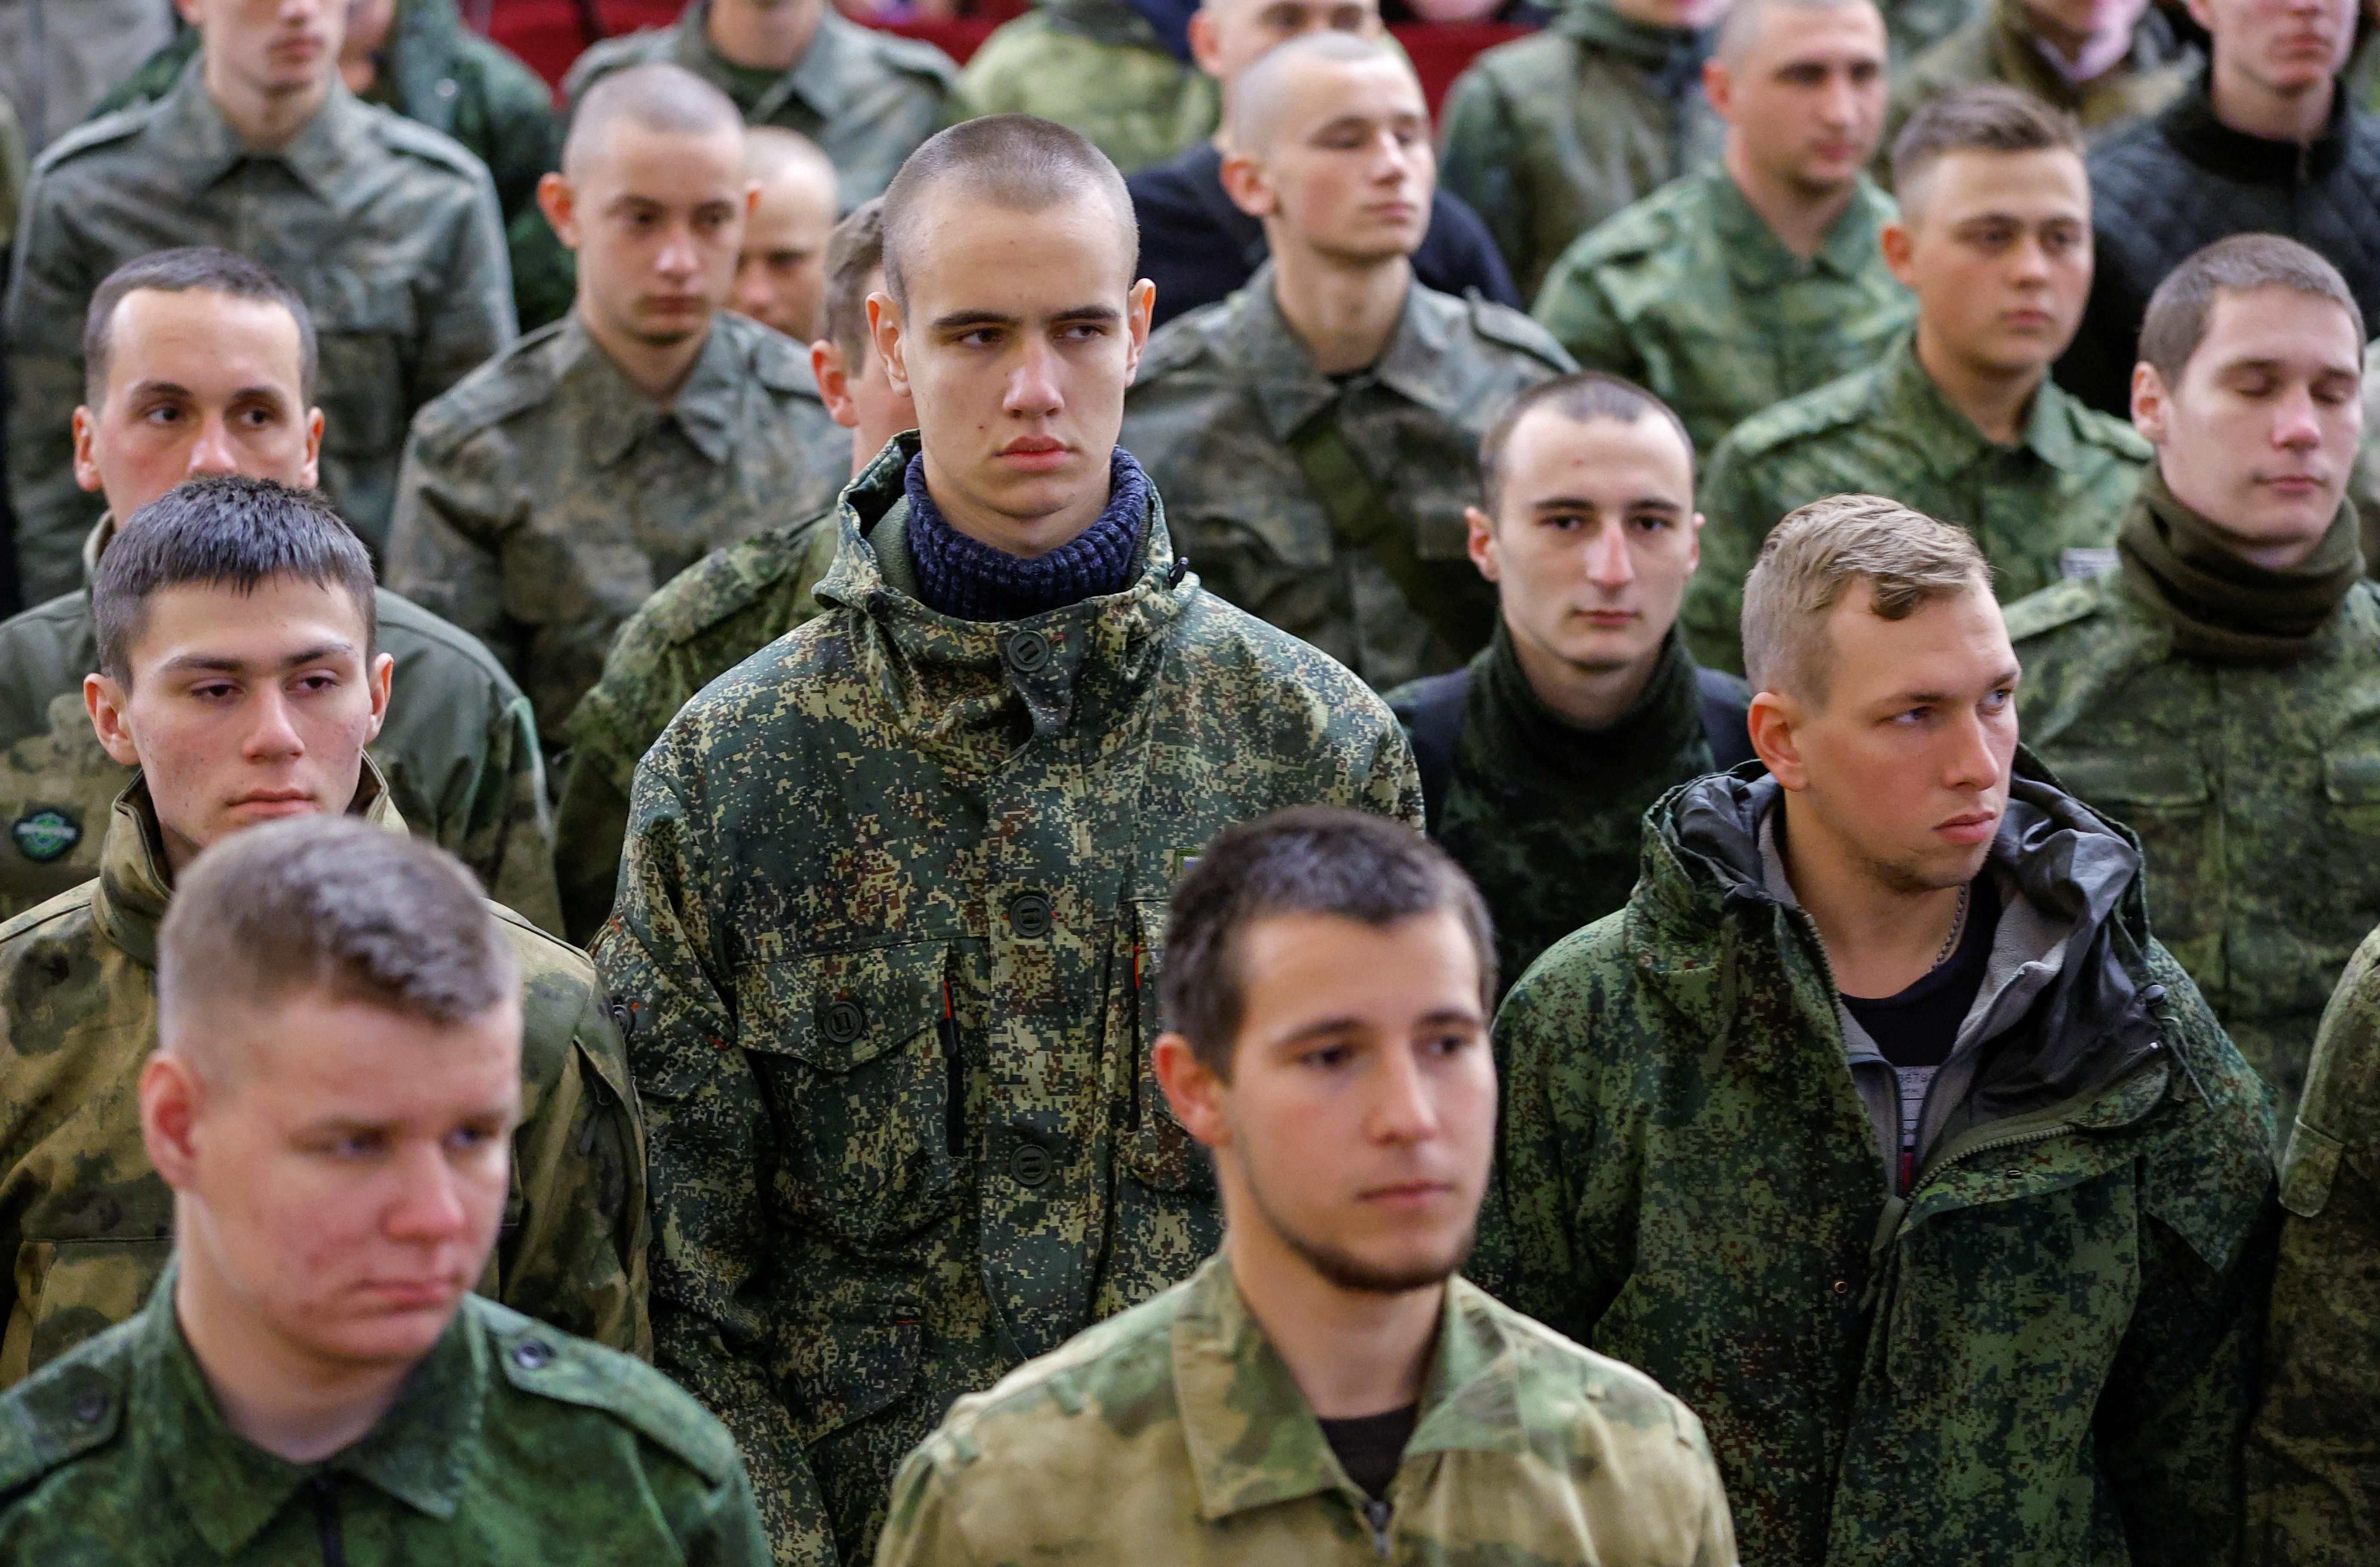 Demobilised students return back from Russia's military units in Donetsk region